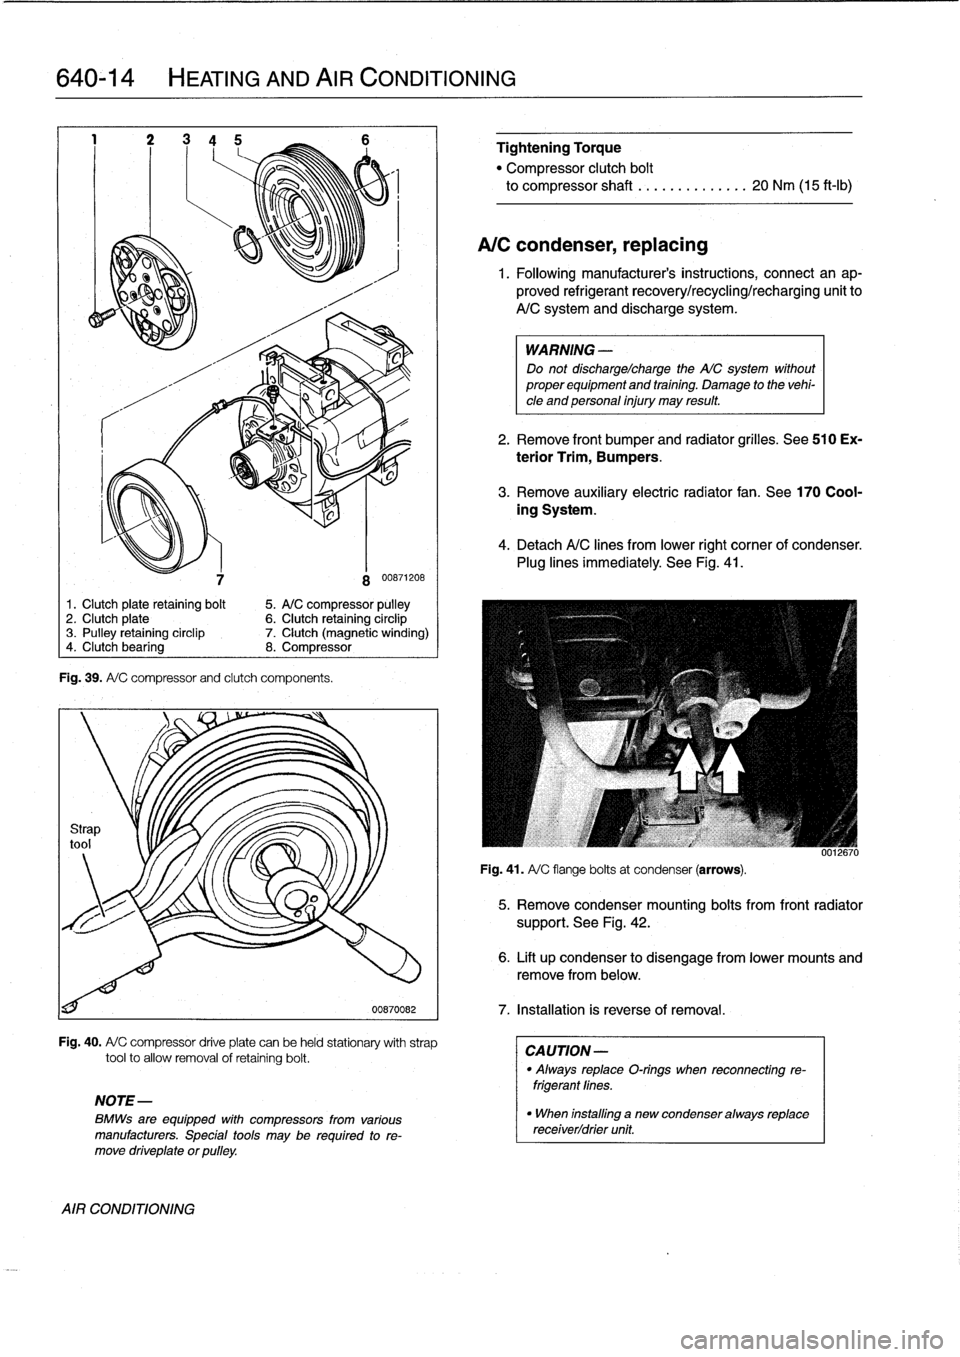 BMW 318i 1997 E36 Owners Manual 
640-14

	

HEATING
AND
AIR
CONDITIONING

7
Fig
.
39
.
A/
C
compressorand
clutch
components
.

8
00871208

1.
Clutch
plate
retaining
bolt

	

5
.
A/C
compressor
pulley
2
.
Clutch
plate

	

6
.
Clutch
